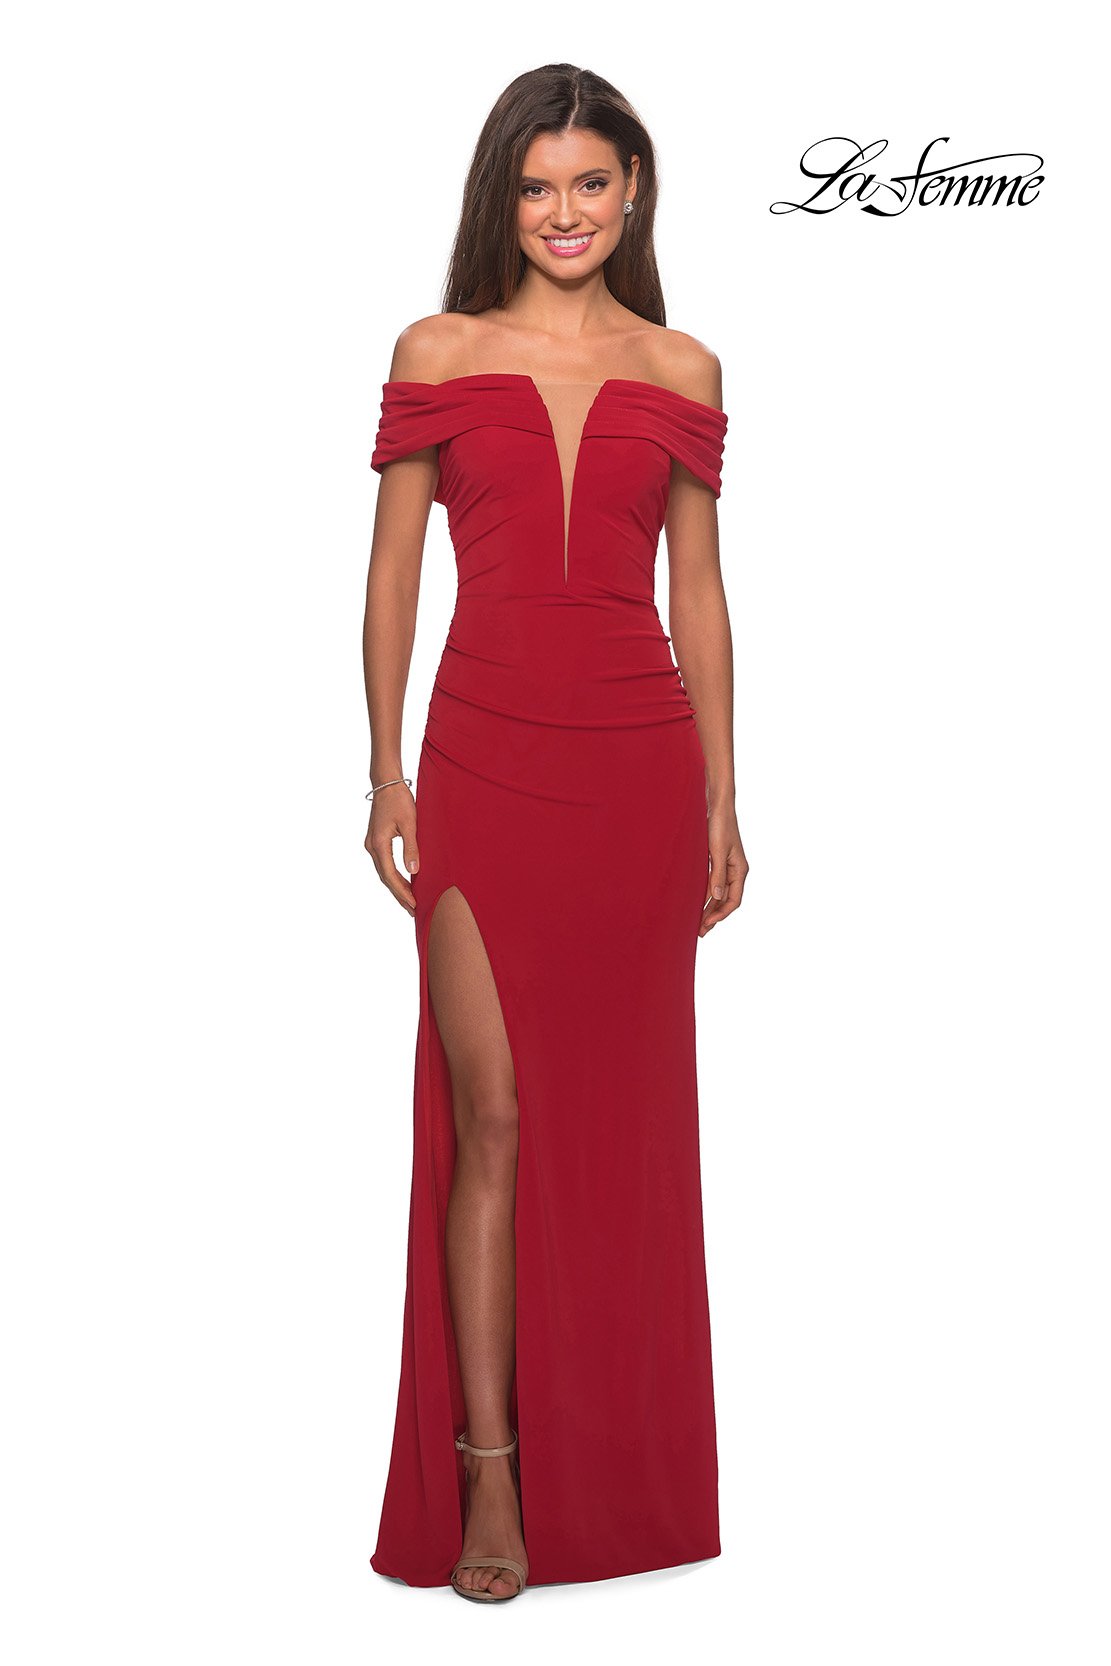 La Femme 28132 dress images in these colors: Black, Deep Red, White.